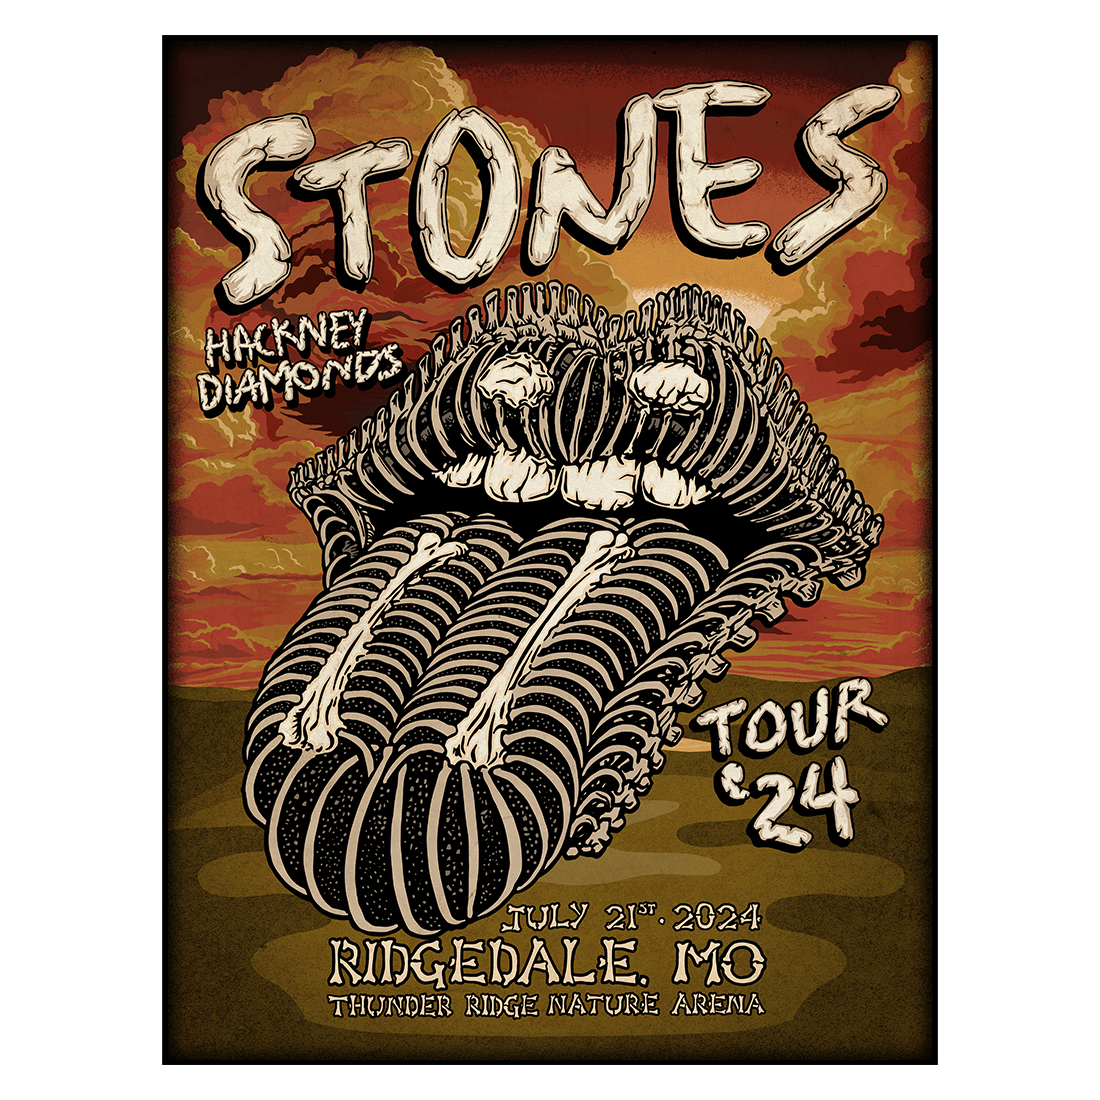 The Rolling Stones - Ridgedale, MO 2024 Lithograph